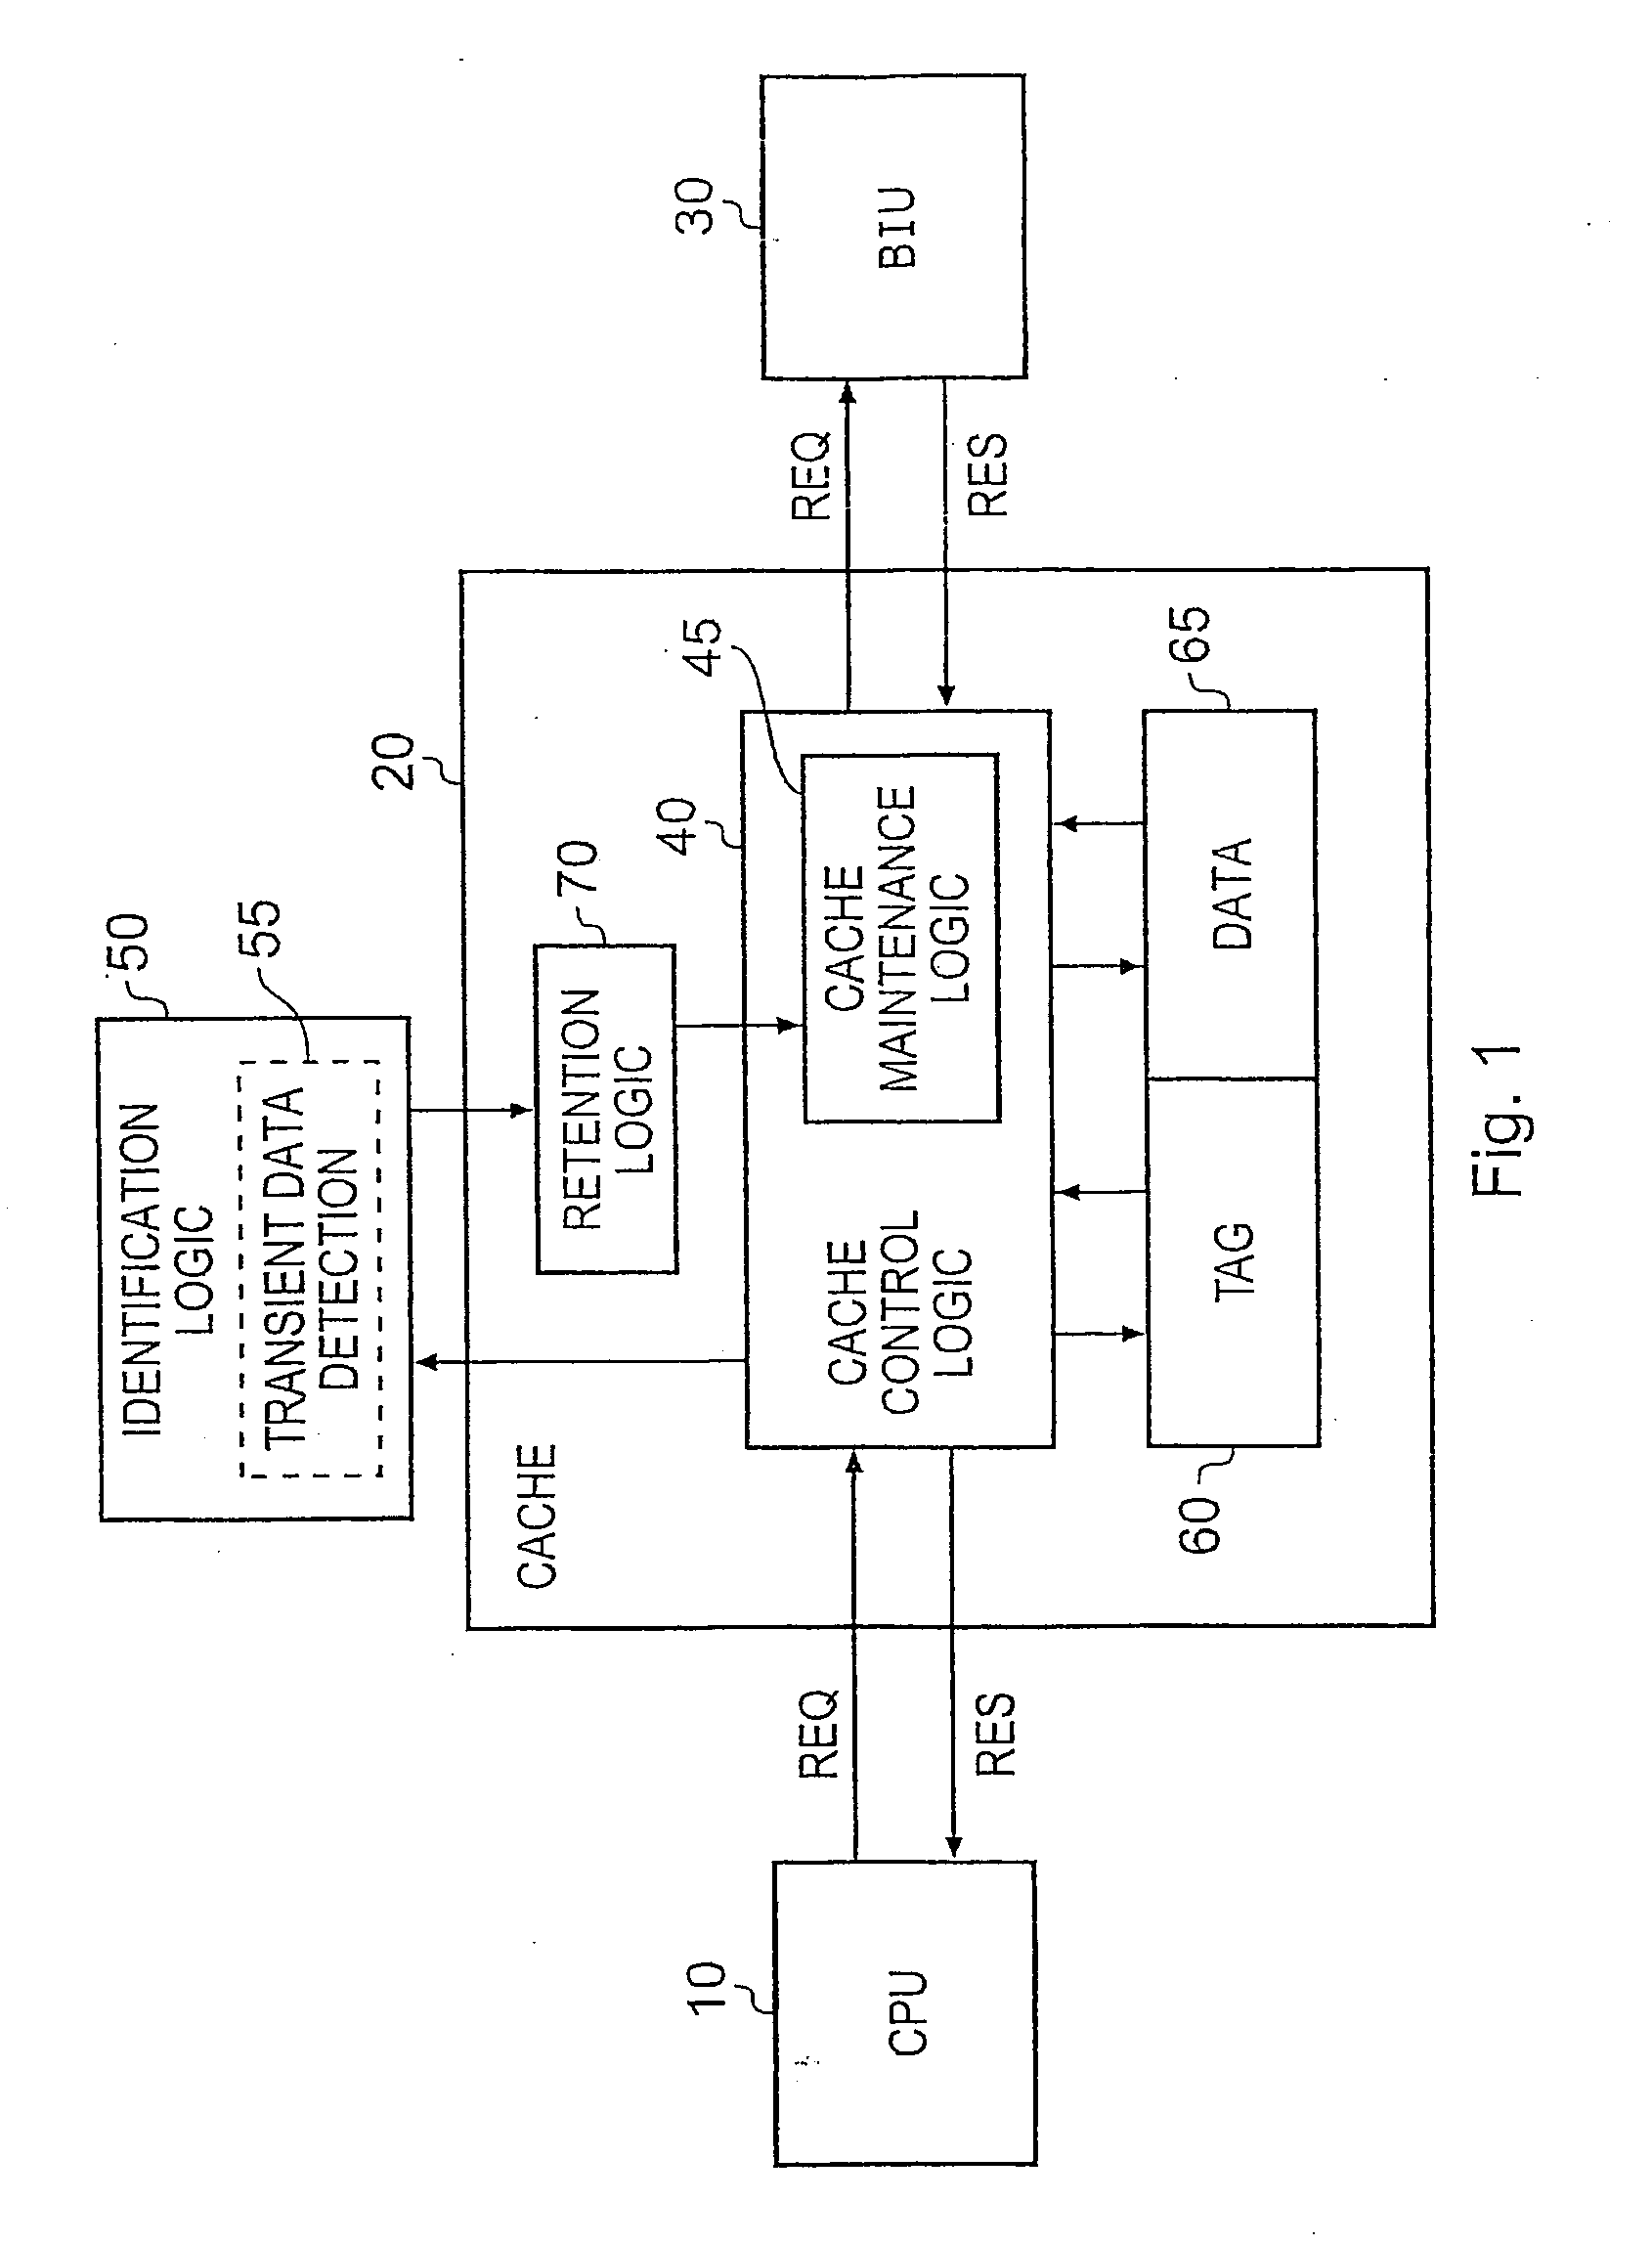 Cache Management Within A Data Processing Apparatus